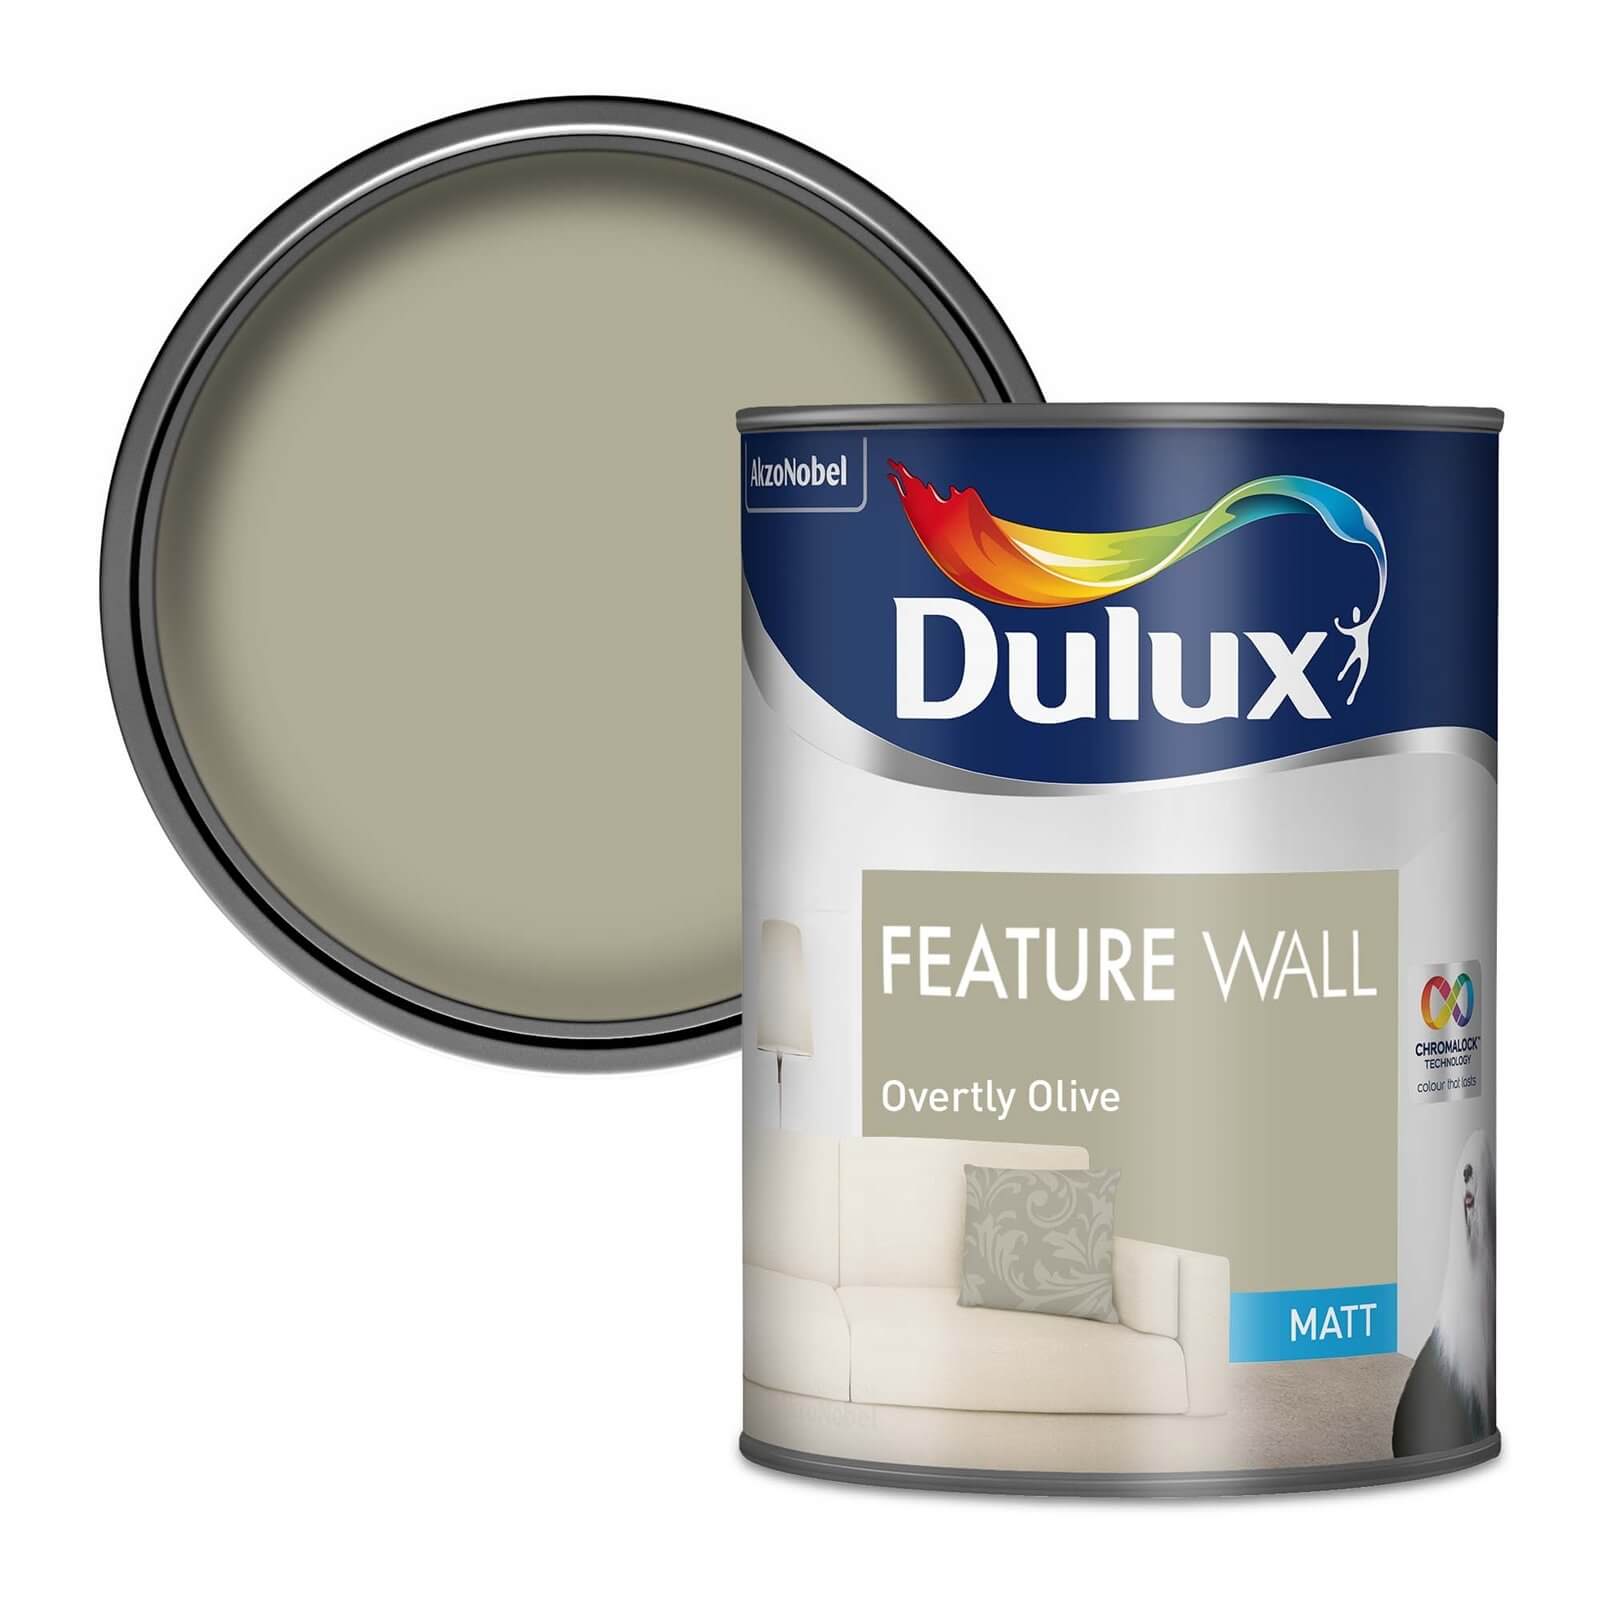 Dulux Feature Wall Overtly Olive - Matt Emulsion Paint - 1.25L